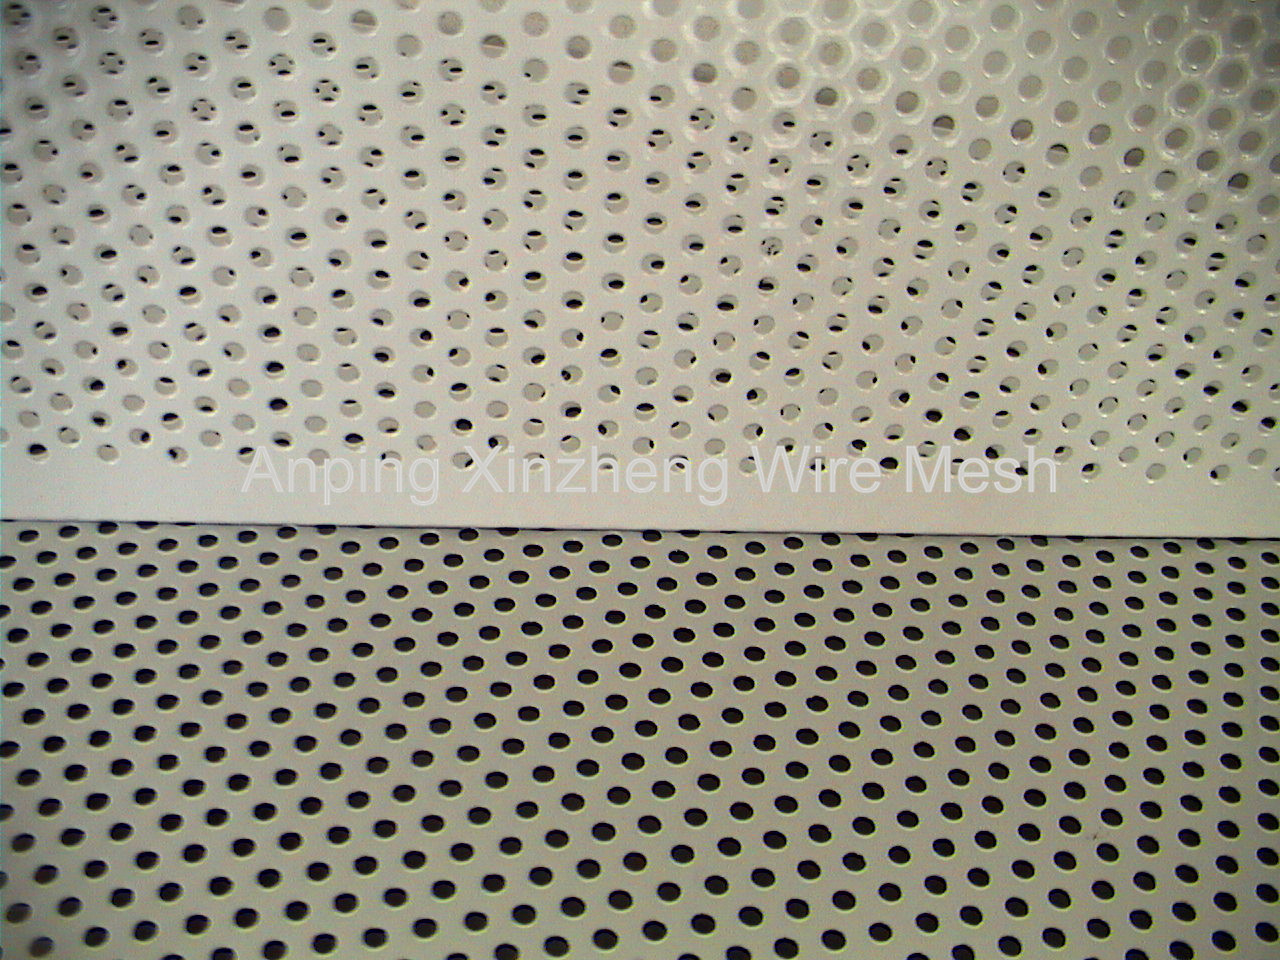 Aluminum Perforated Sheets